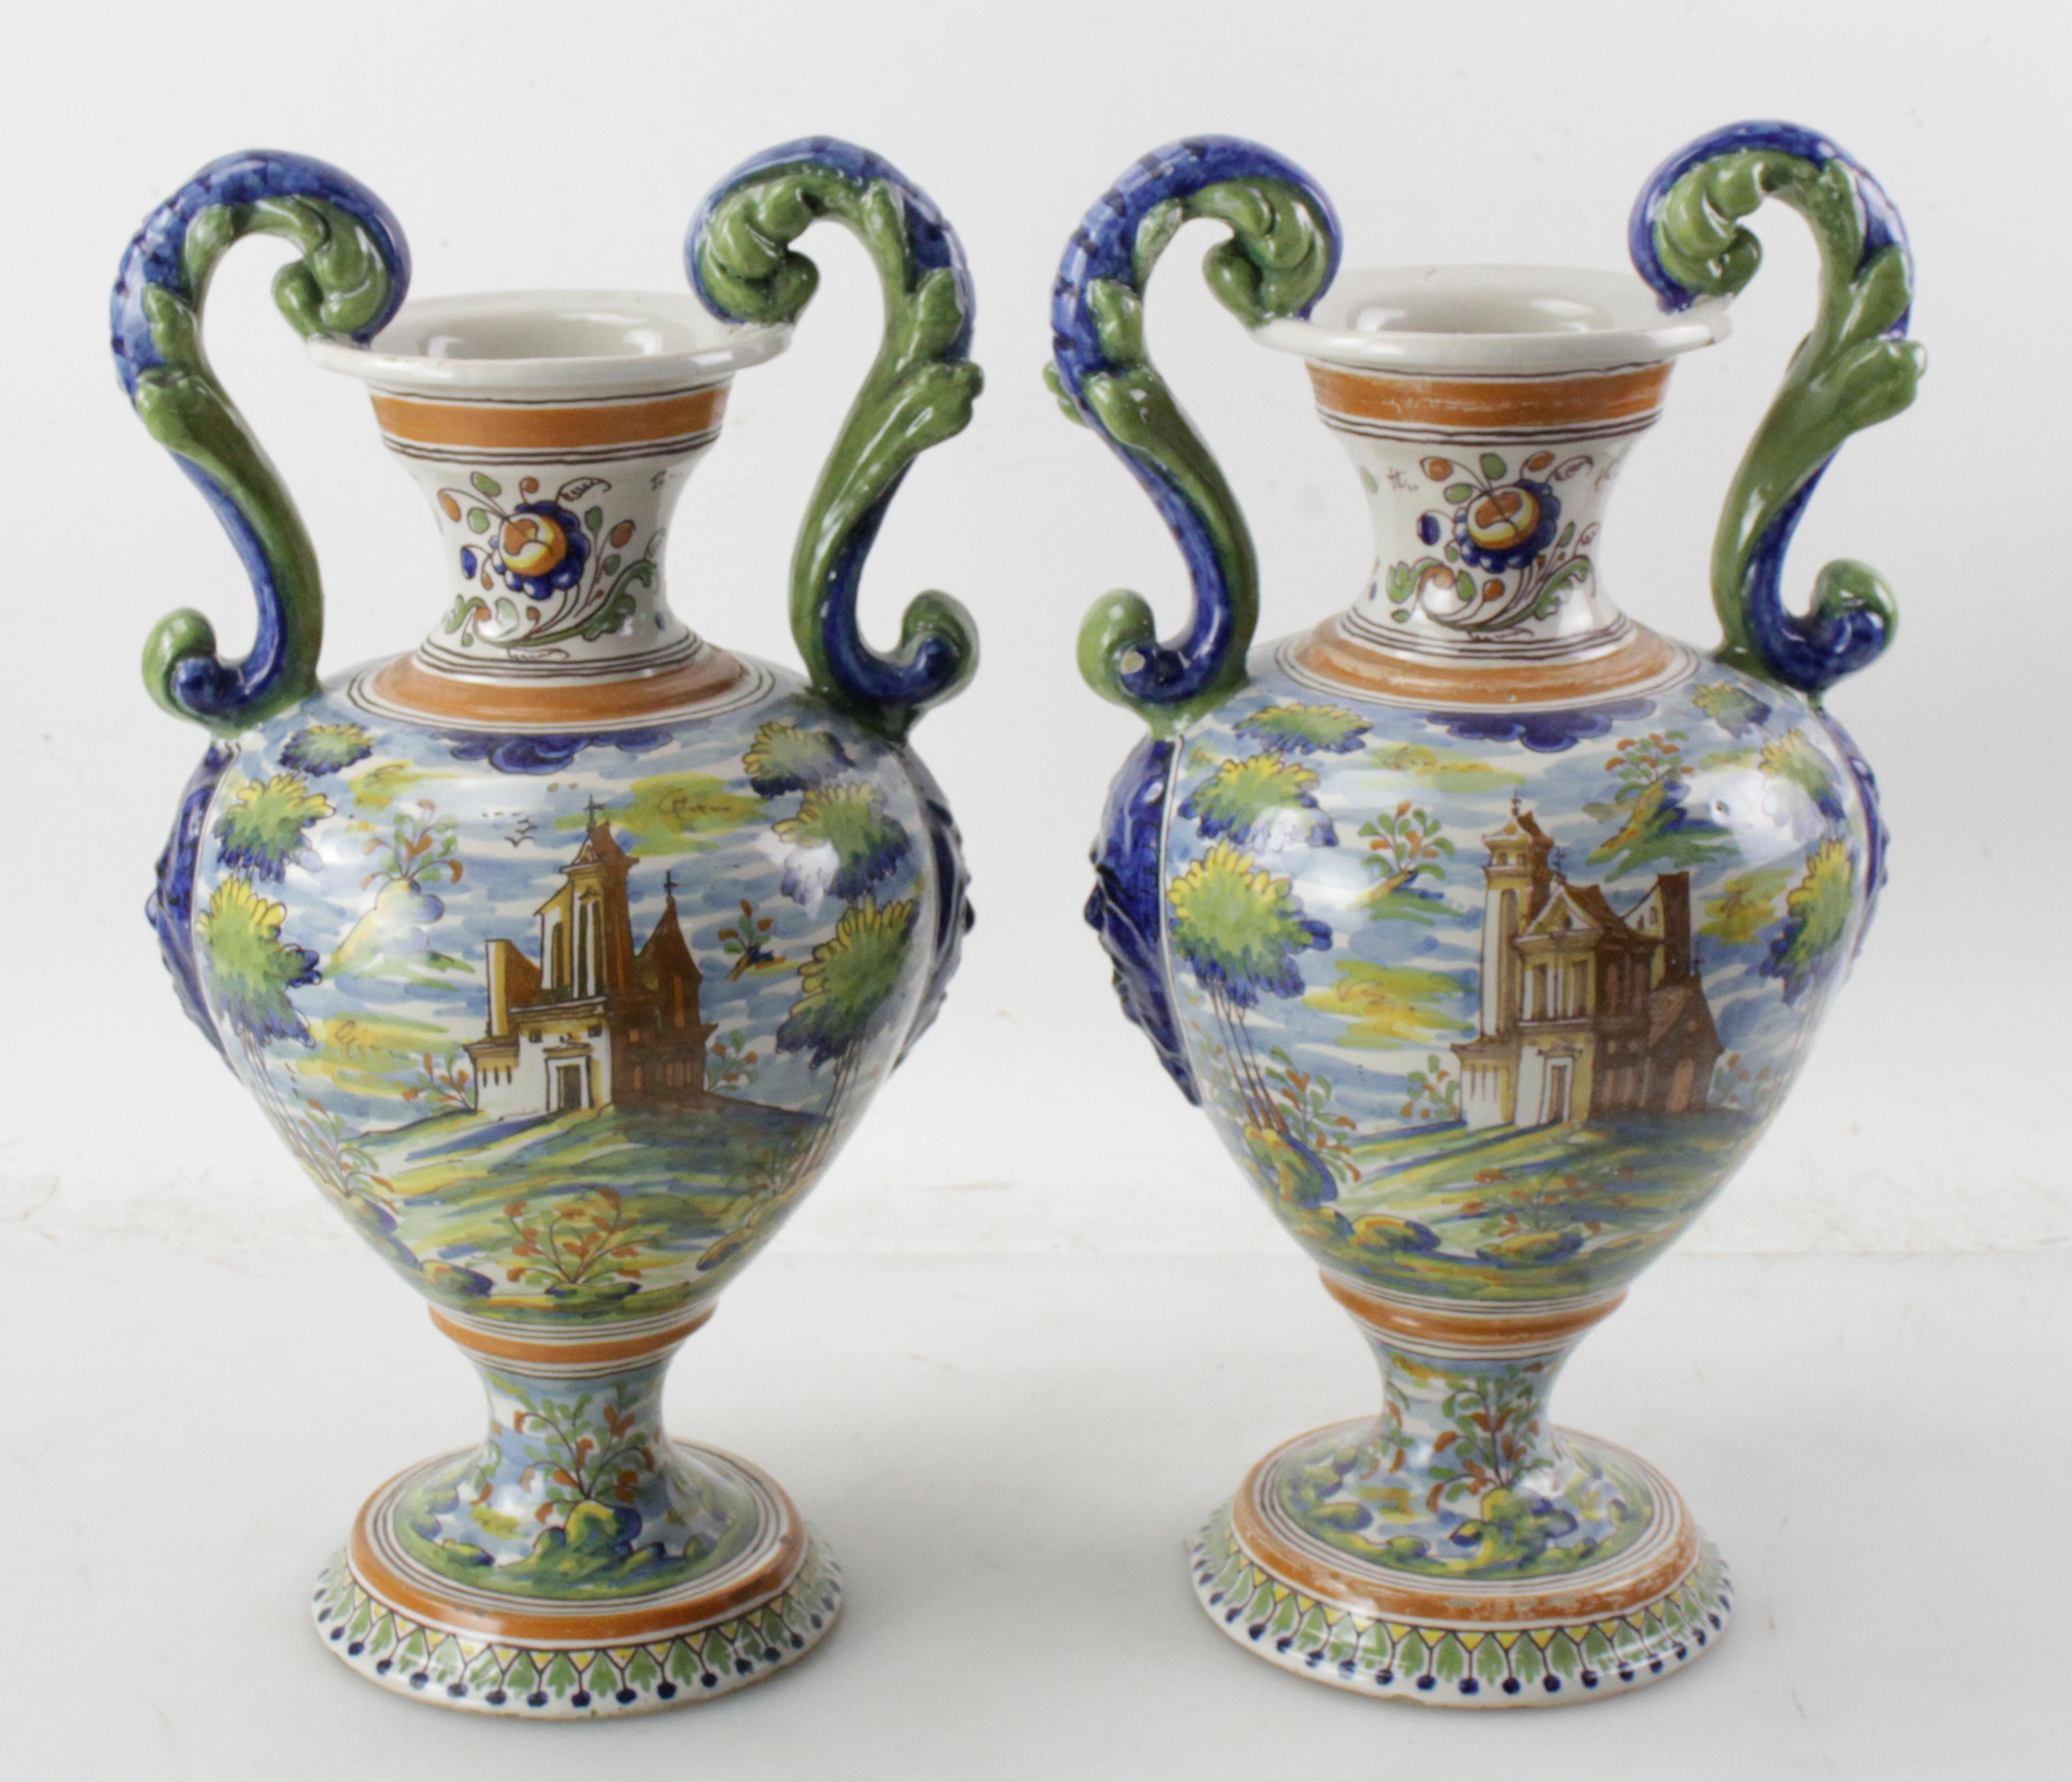 
From Italy, this colorful pair of antique Majolica urns have different, hand-painted,  scenes on each urn.  On the bodies are brightly colored scenes with churches, figures, and landscaping from Grecian or Roman times. A lovely pair of antique